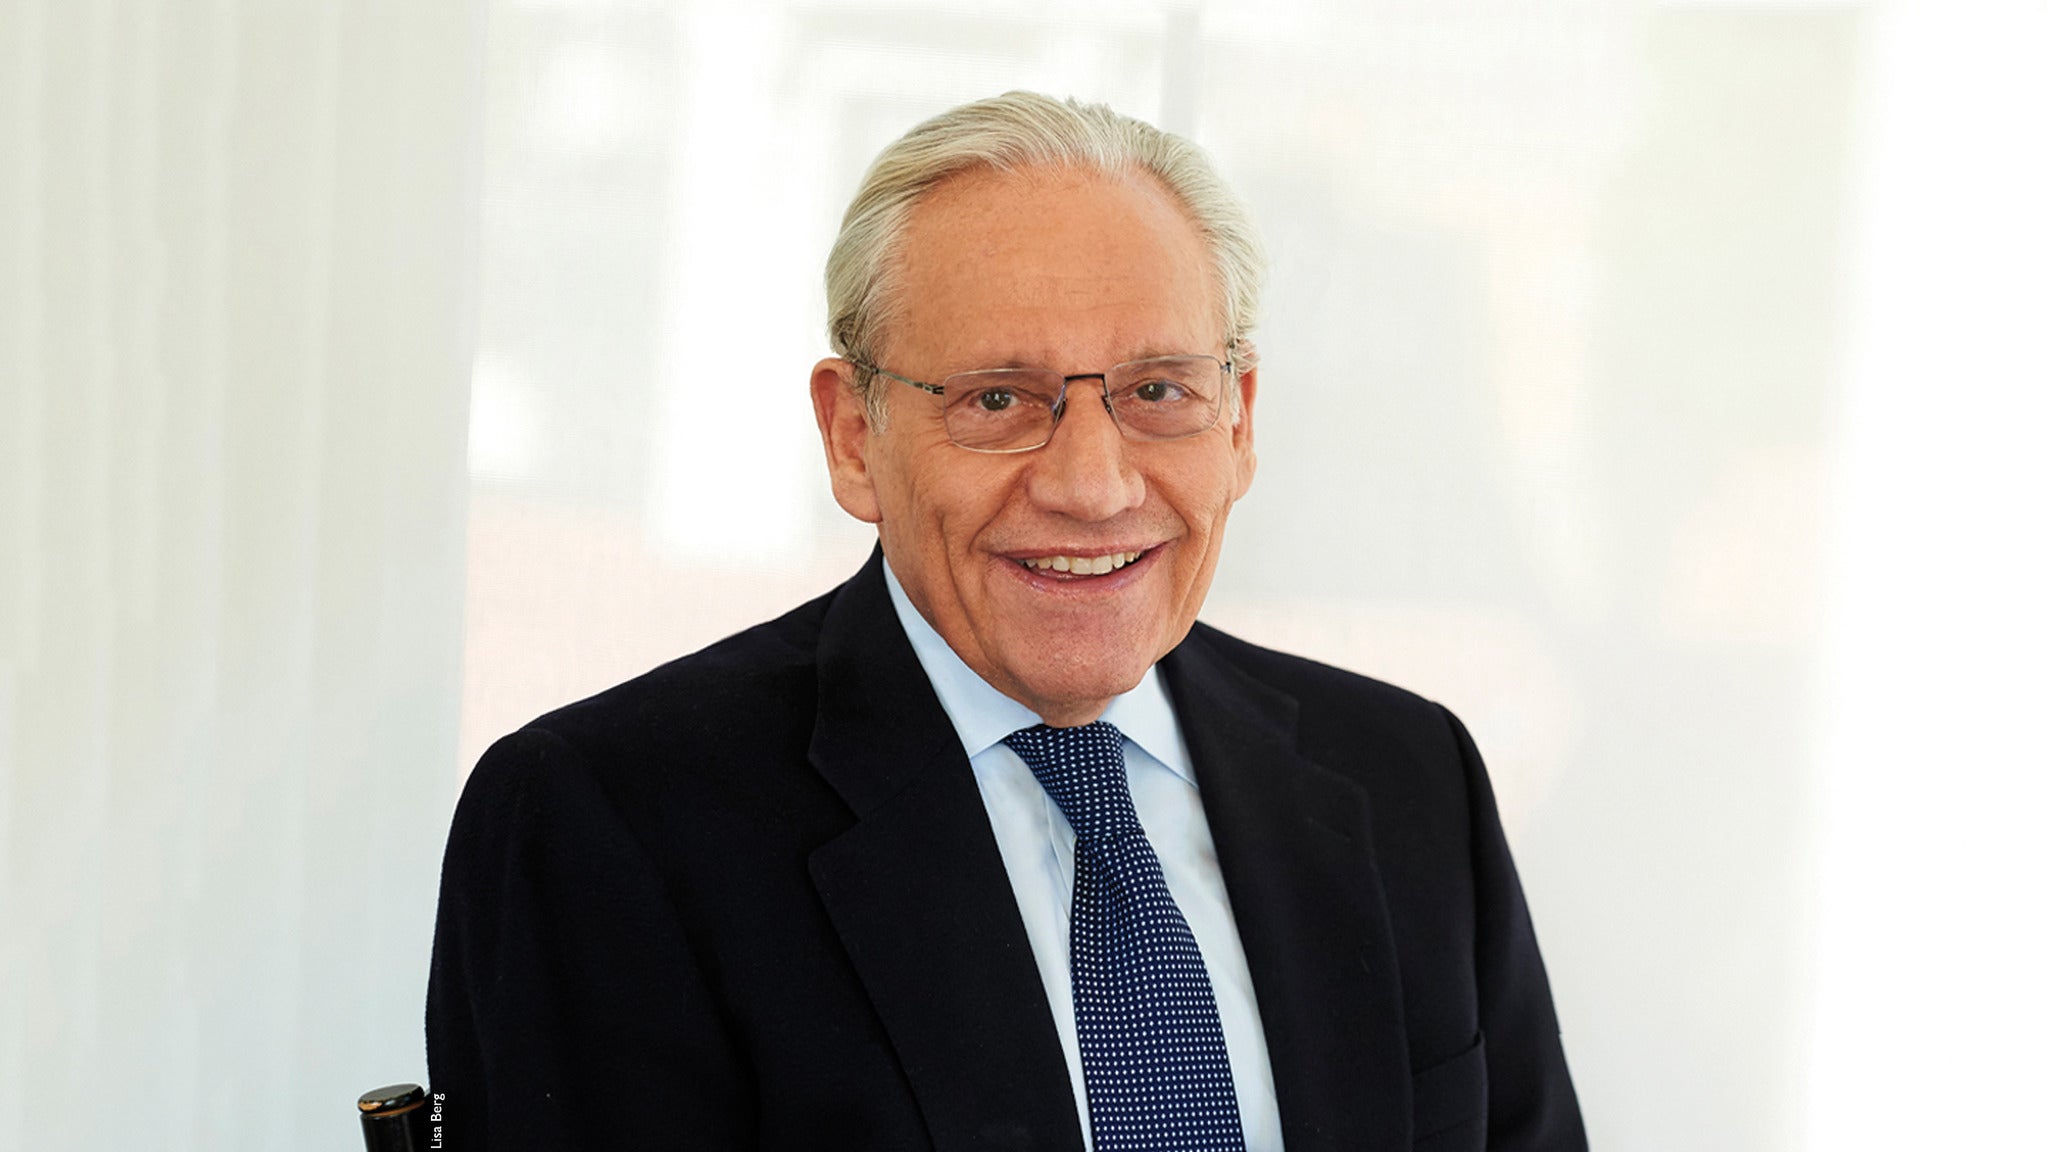 A Conversation with Bob Woodward in Boston event information